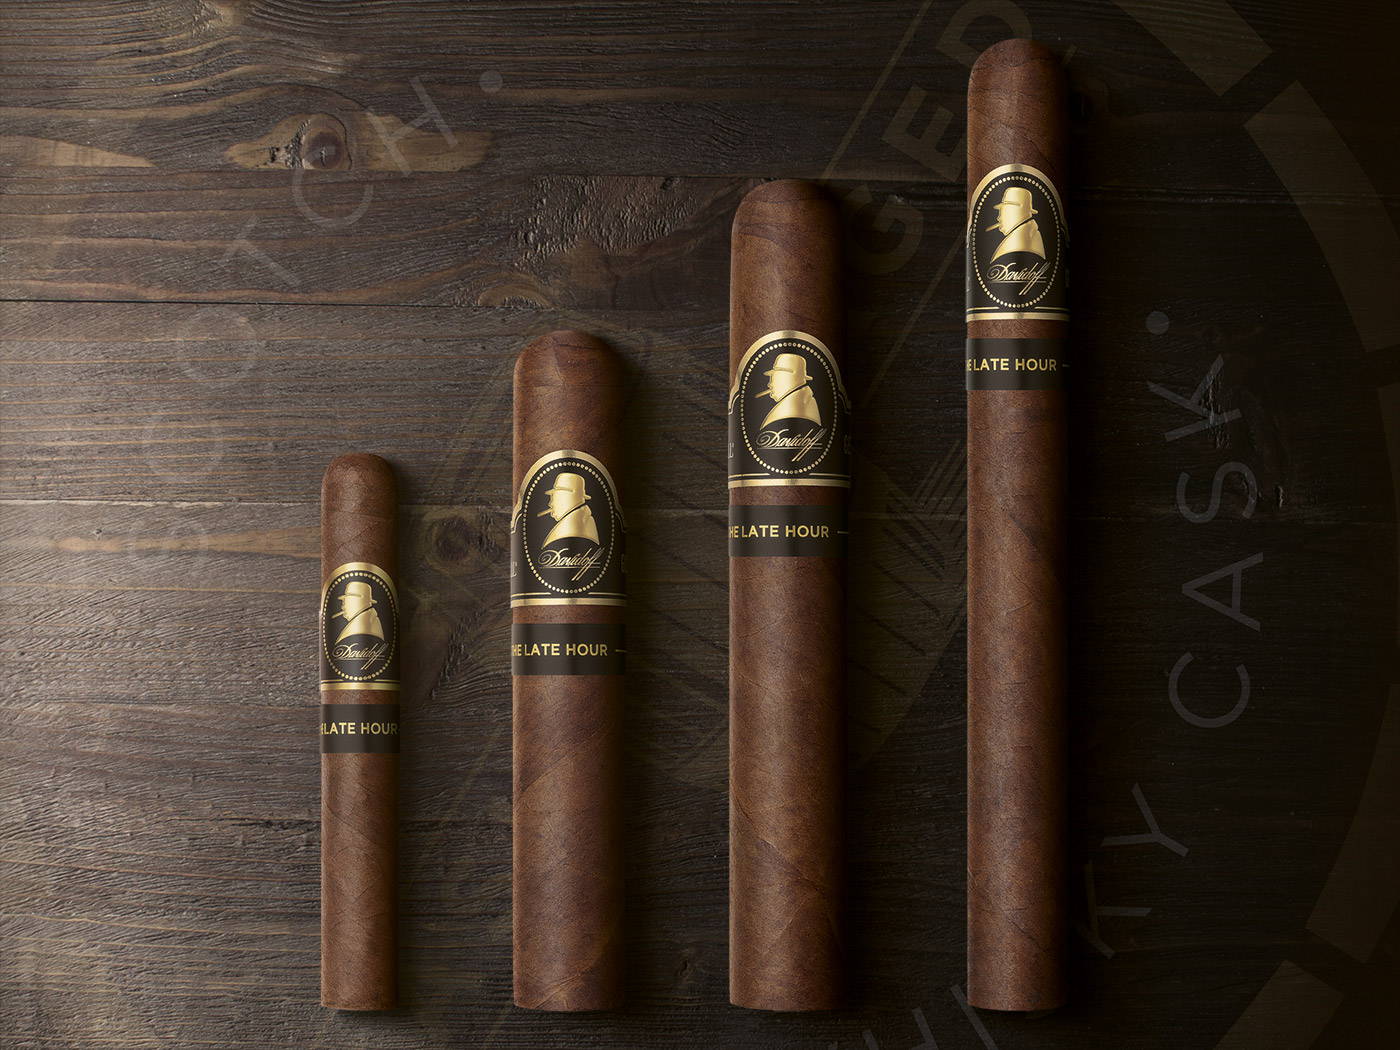 The cigars of the Davidoff Winston Churchill «The Late Hour Series» next to one another. From left: Petit Panetela, Robusto, Toro, Churchill.